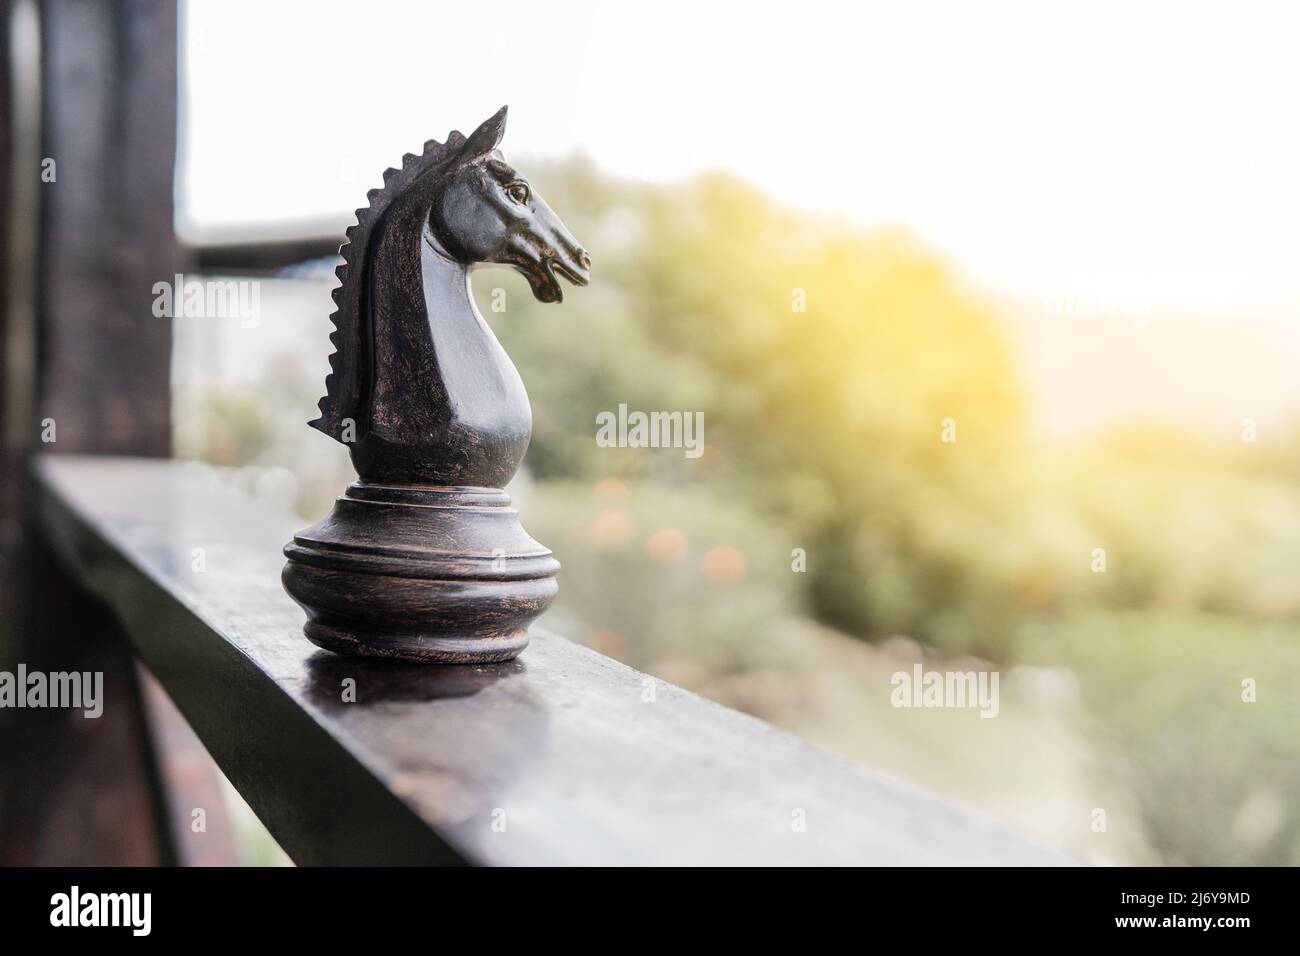 Horse giant chess piece on the wooden balcony of a country house or farm in a rural area Stock Photo